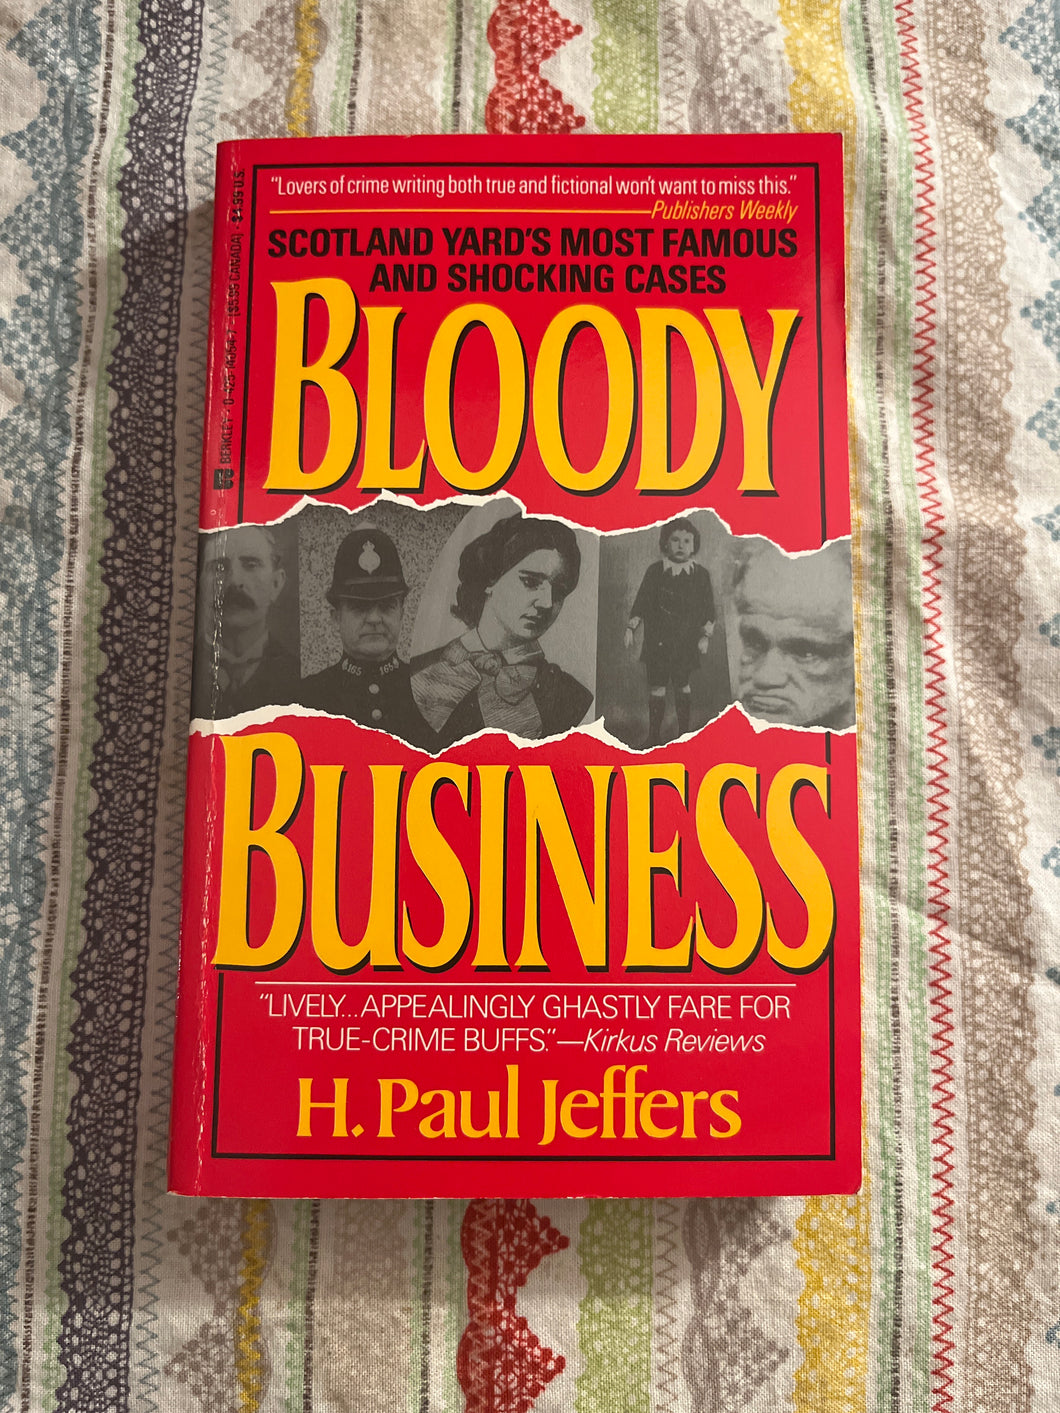 Bloody Business: An Anecdotal History of Scotland Yard